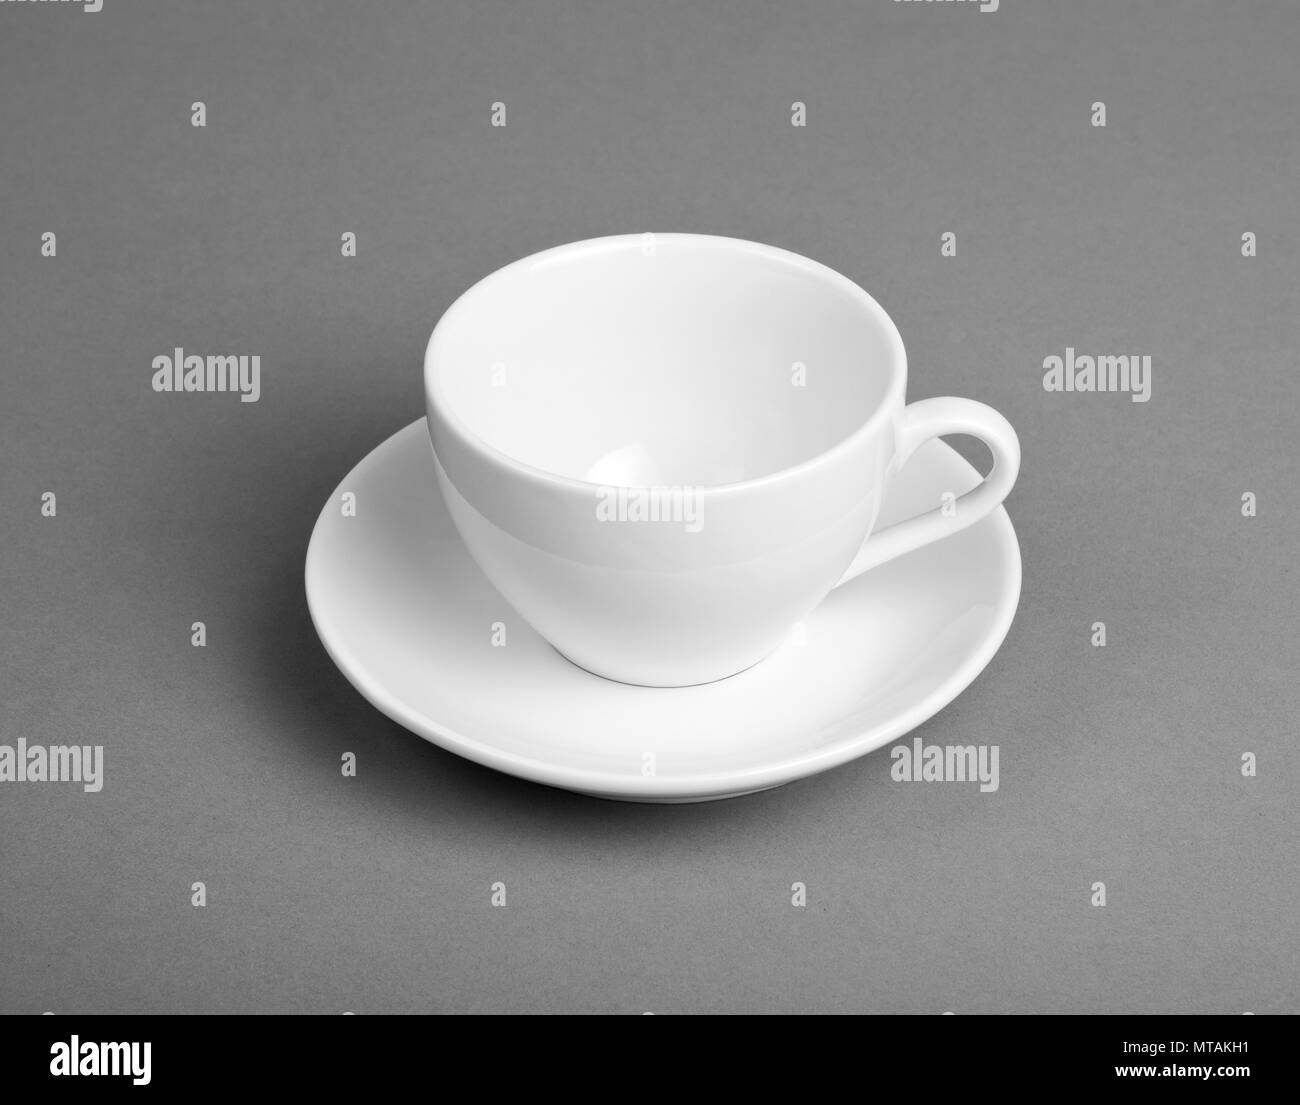 White mug and saucer on a gray background Stock Photo